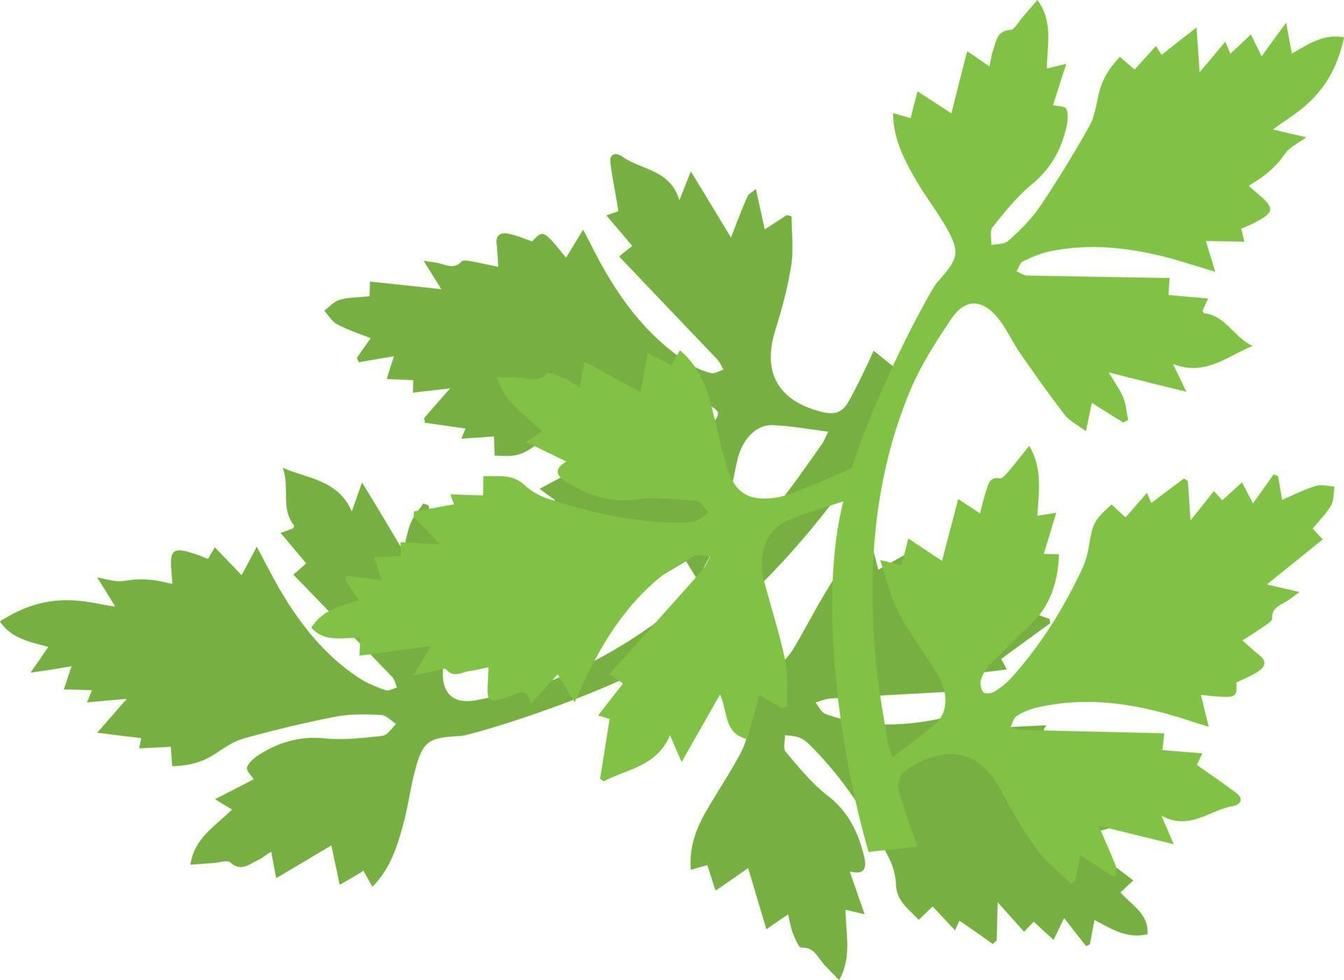 coriander vector illustration on a background.Premium quality symbols.vector icons for concept and graphic design.